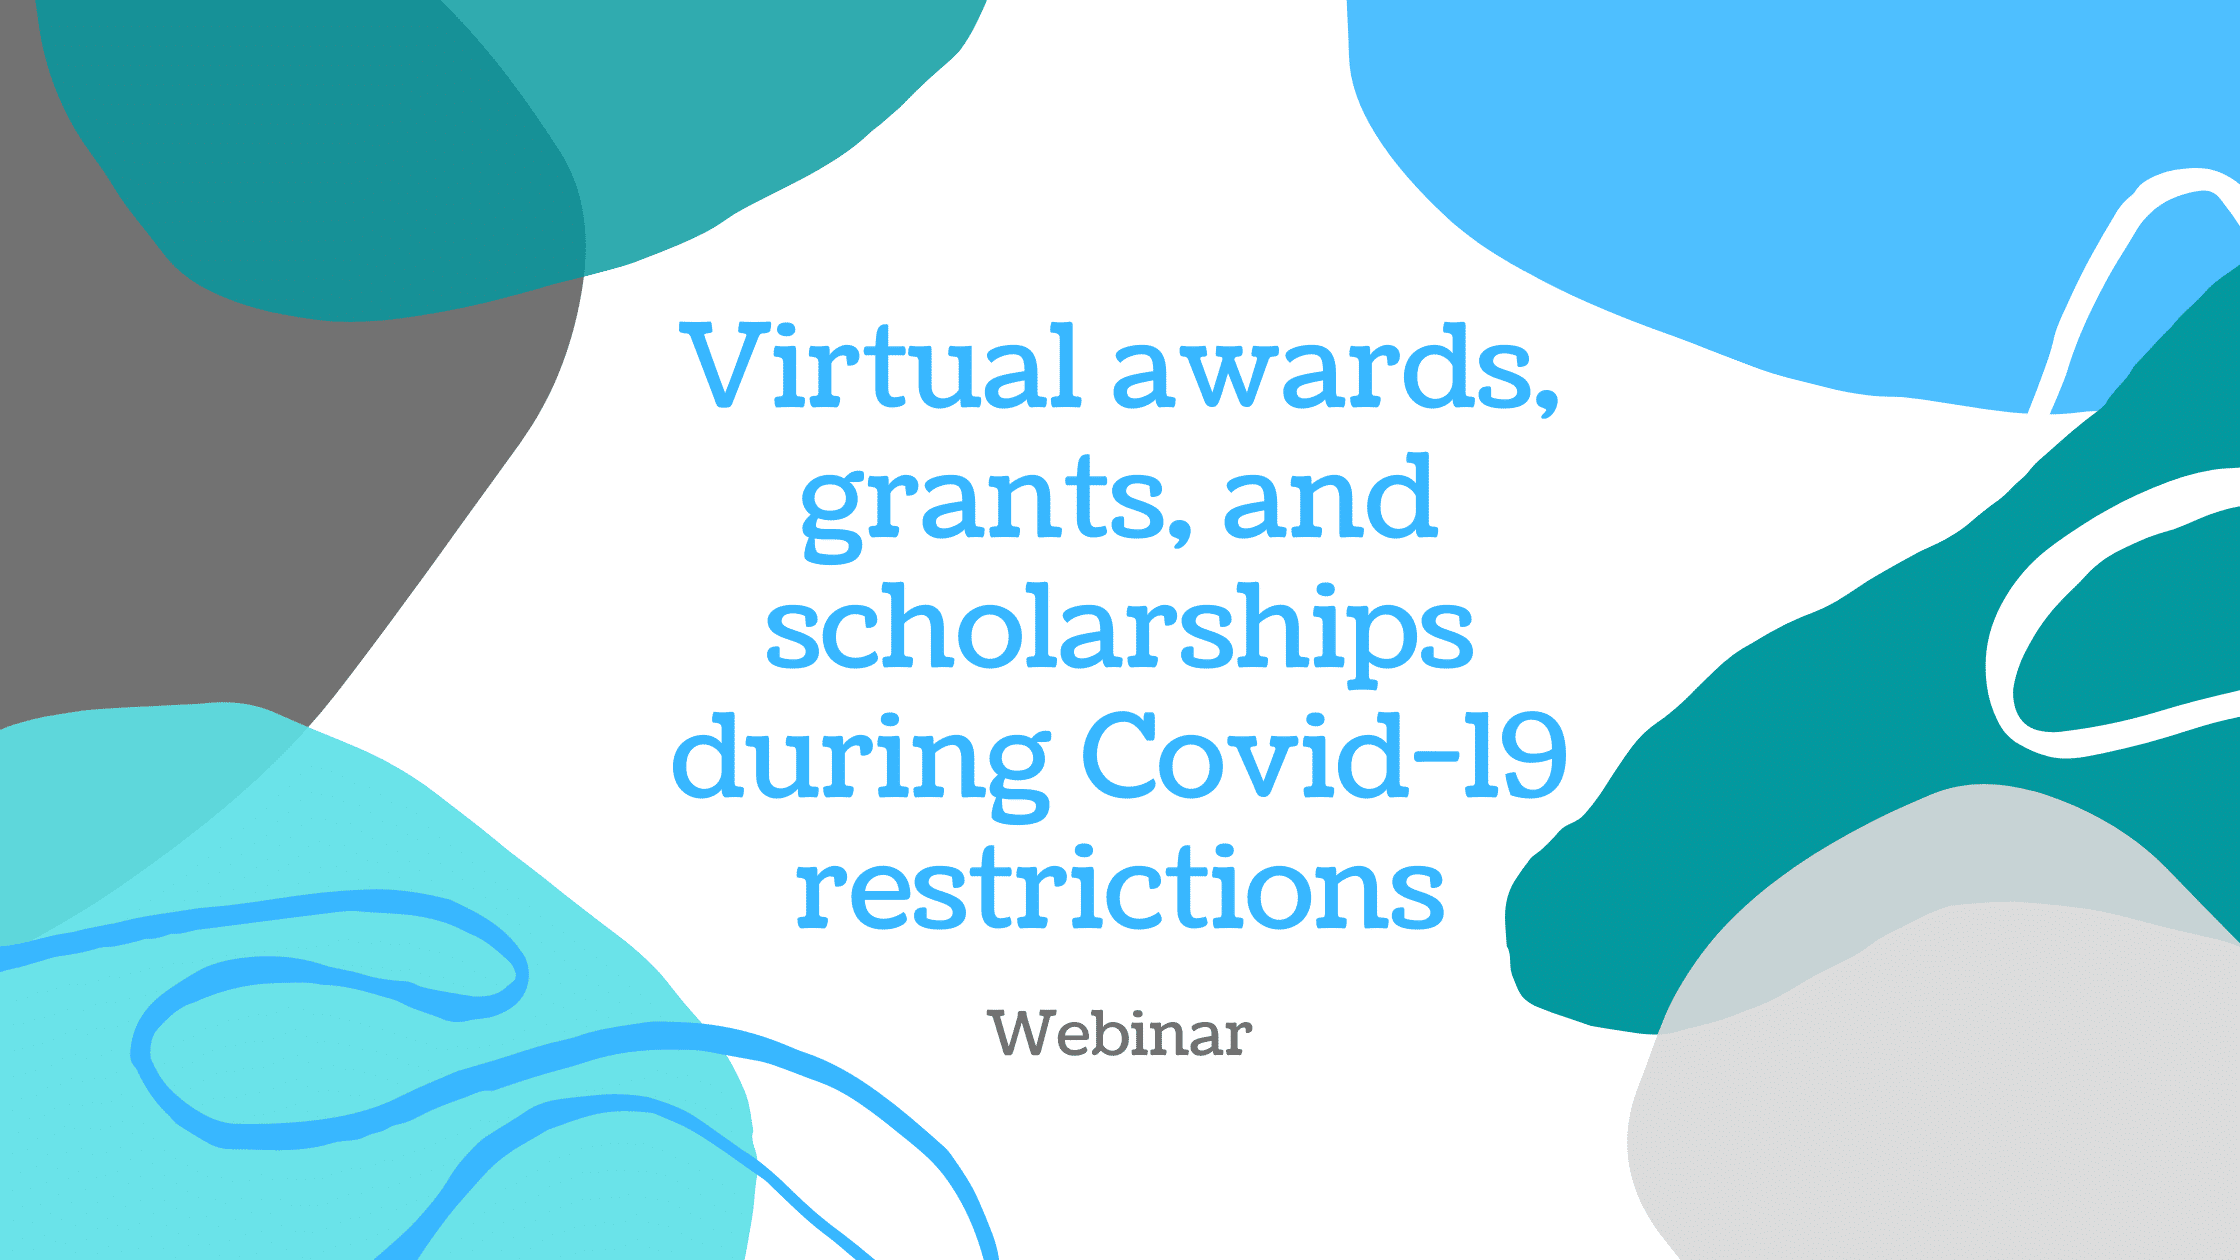 Virtual awards, grants, and scholarships during Covid19 restrictions